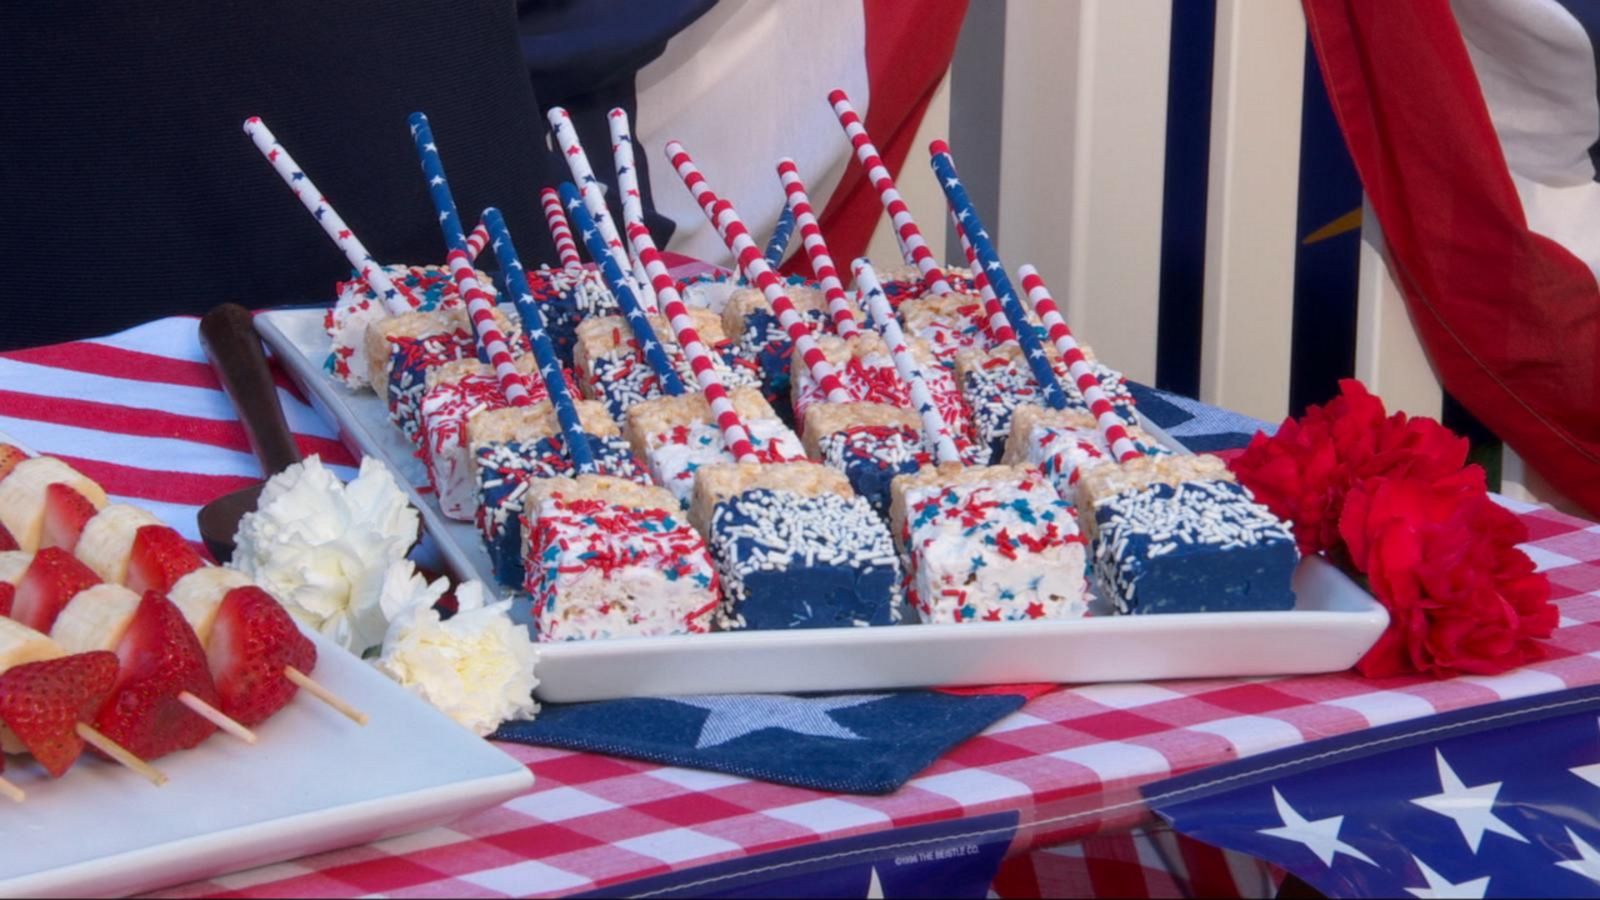 VIDEO: How to throw the perfect July 4th picnic